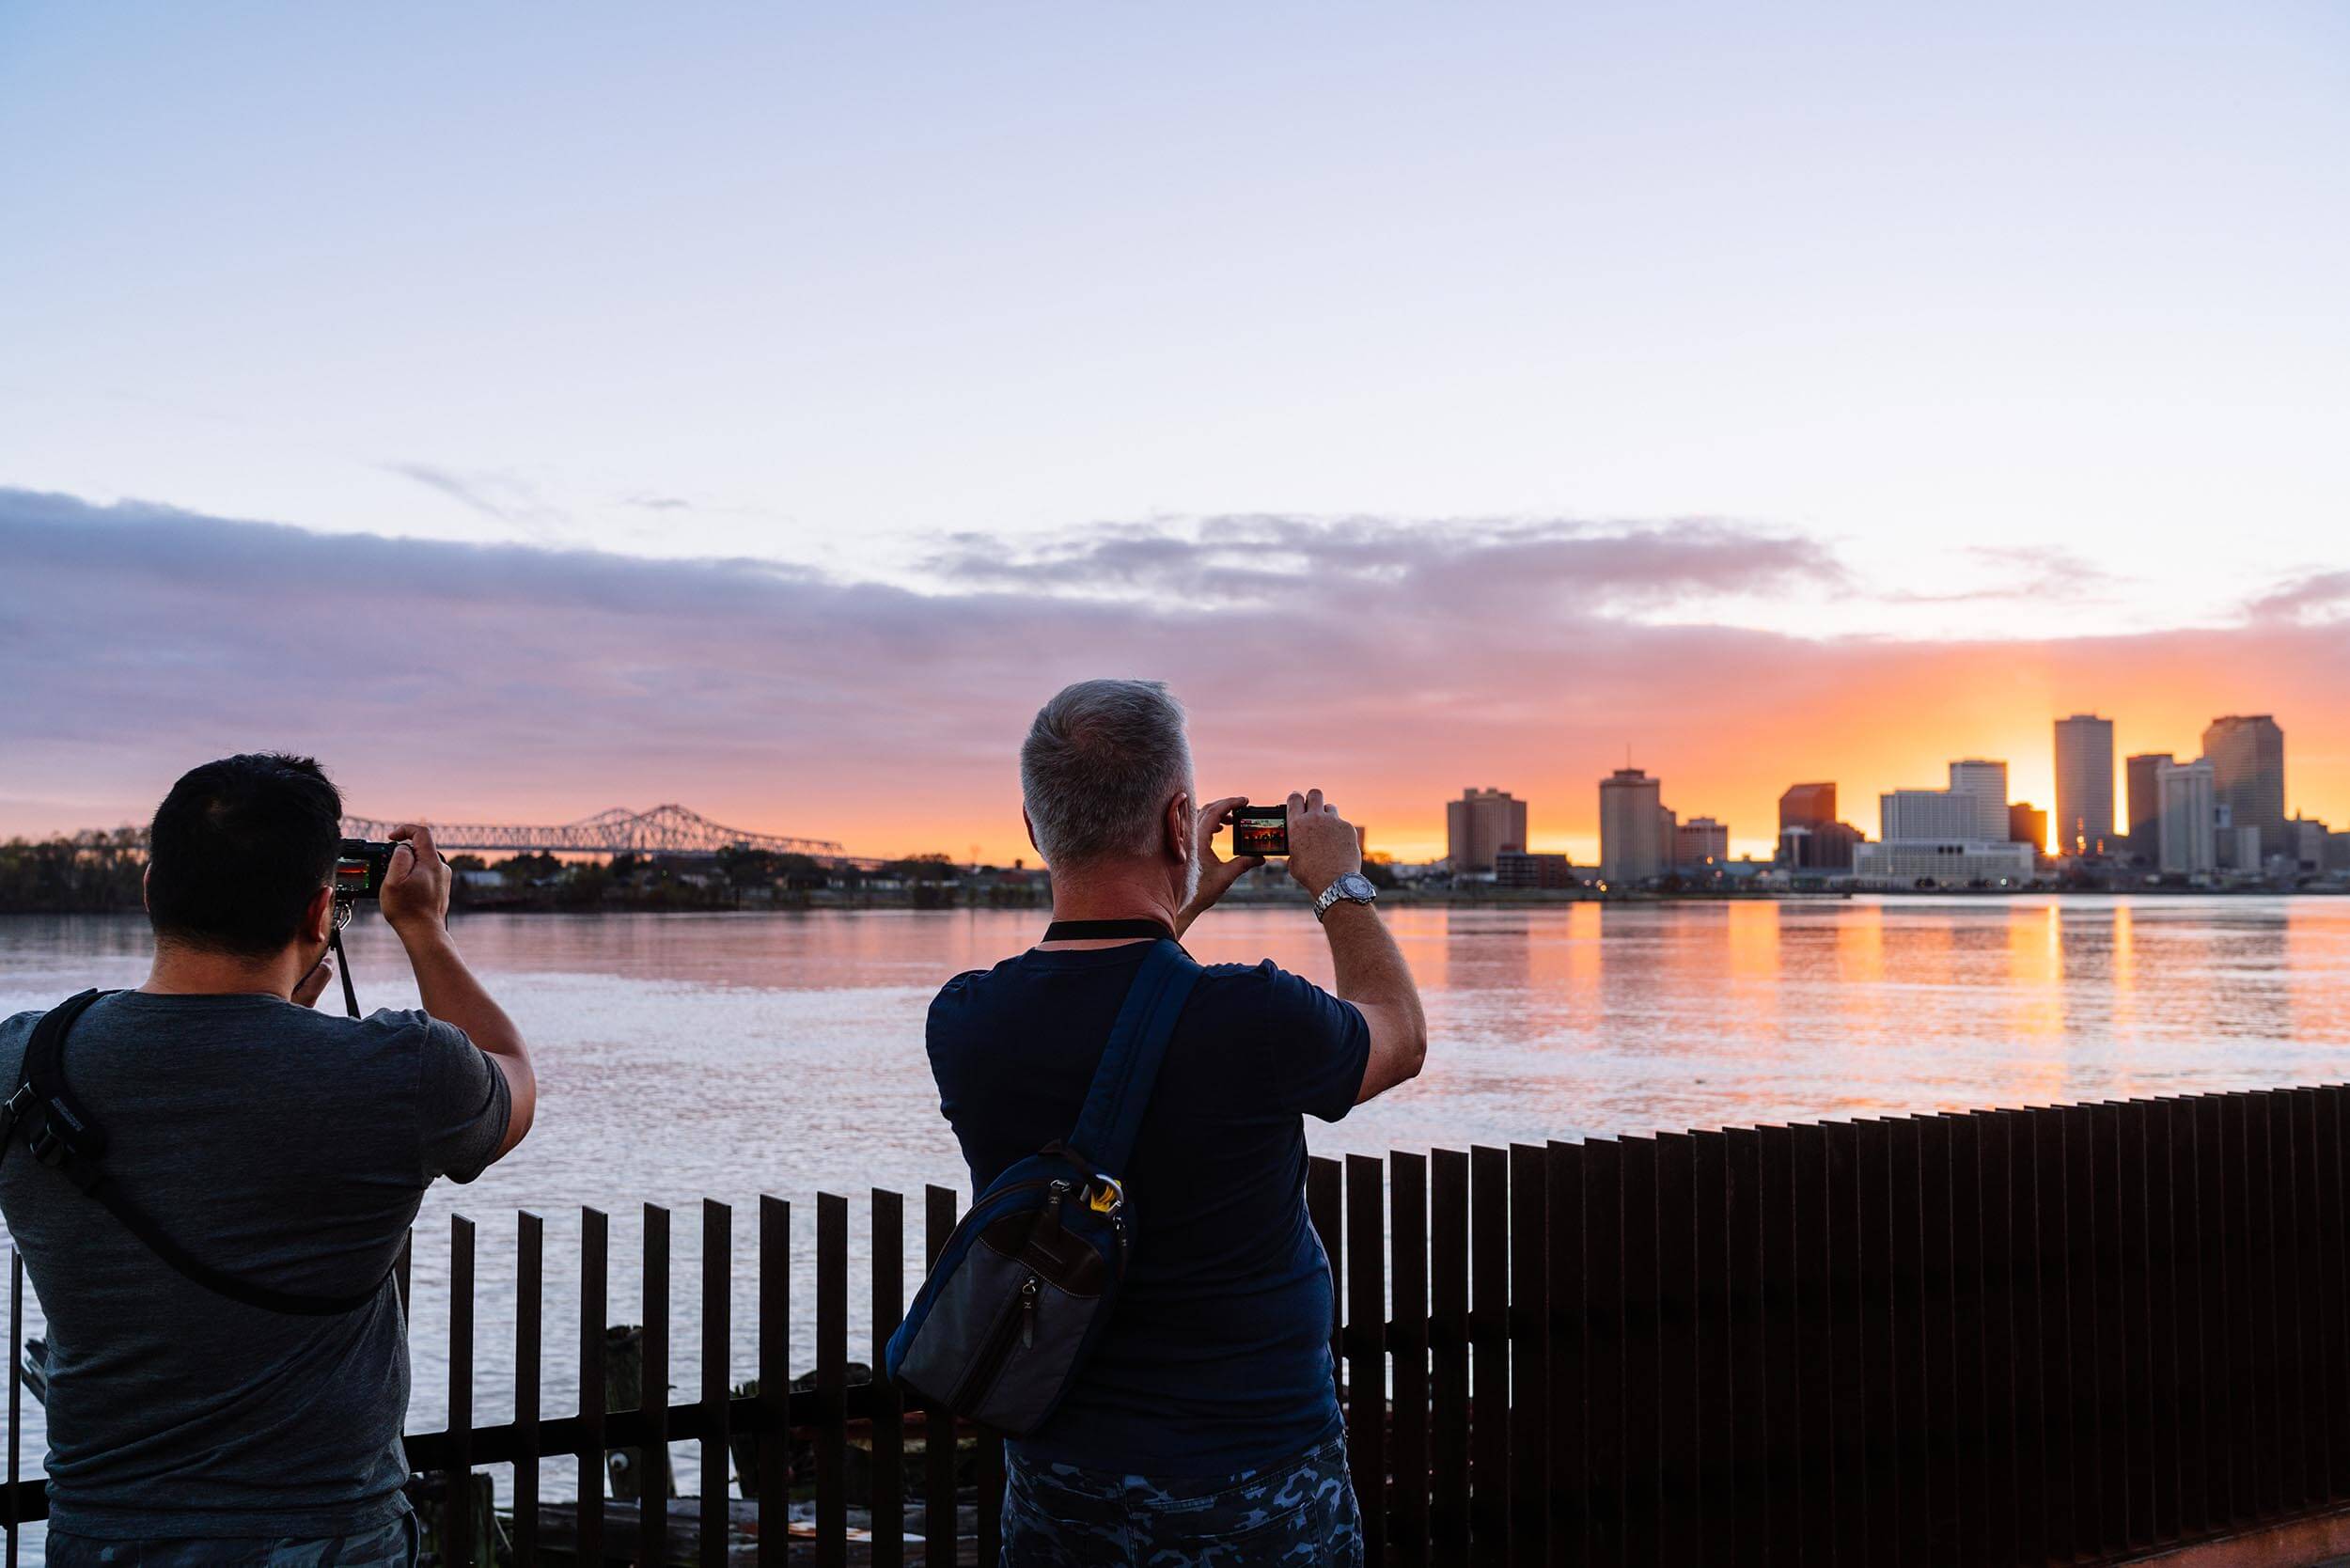 Two men stand along the river photographing the sunset